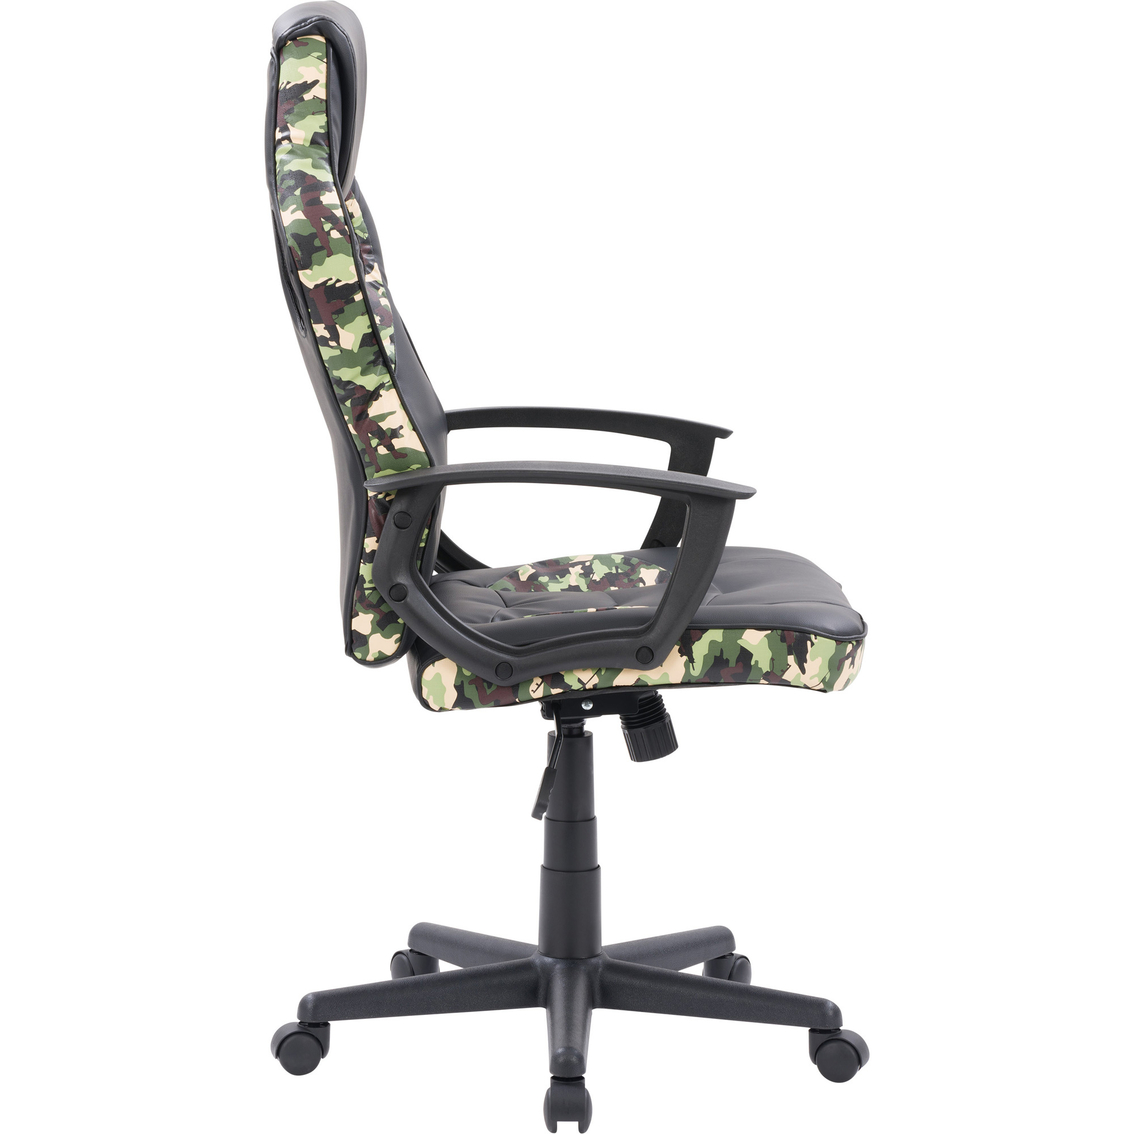 Corliving Mad Dog Black and Camo Gaming Chair - Image 3 of 5